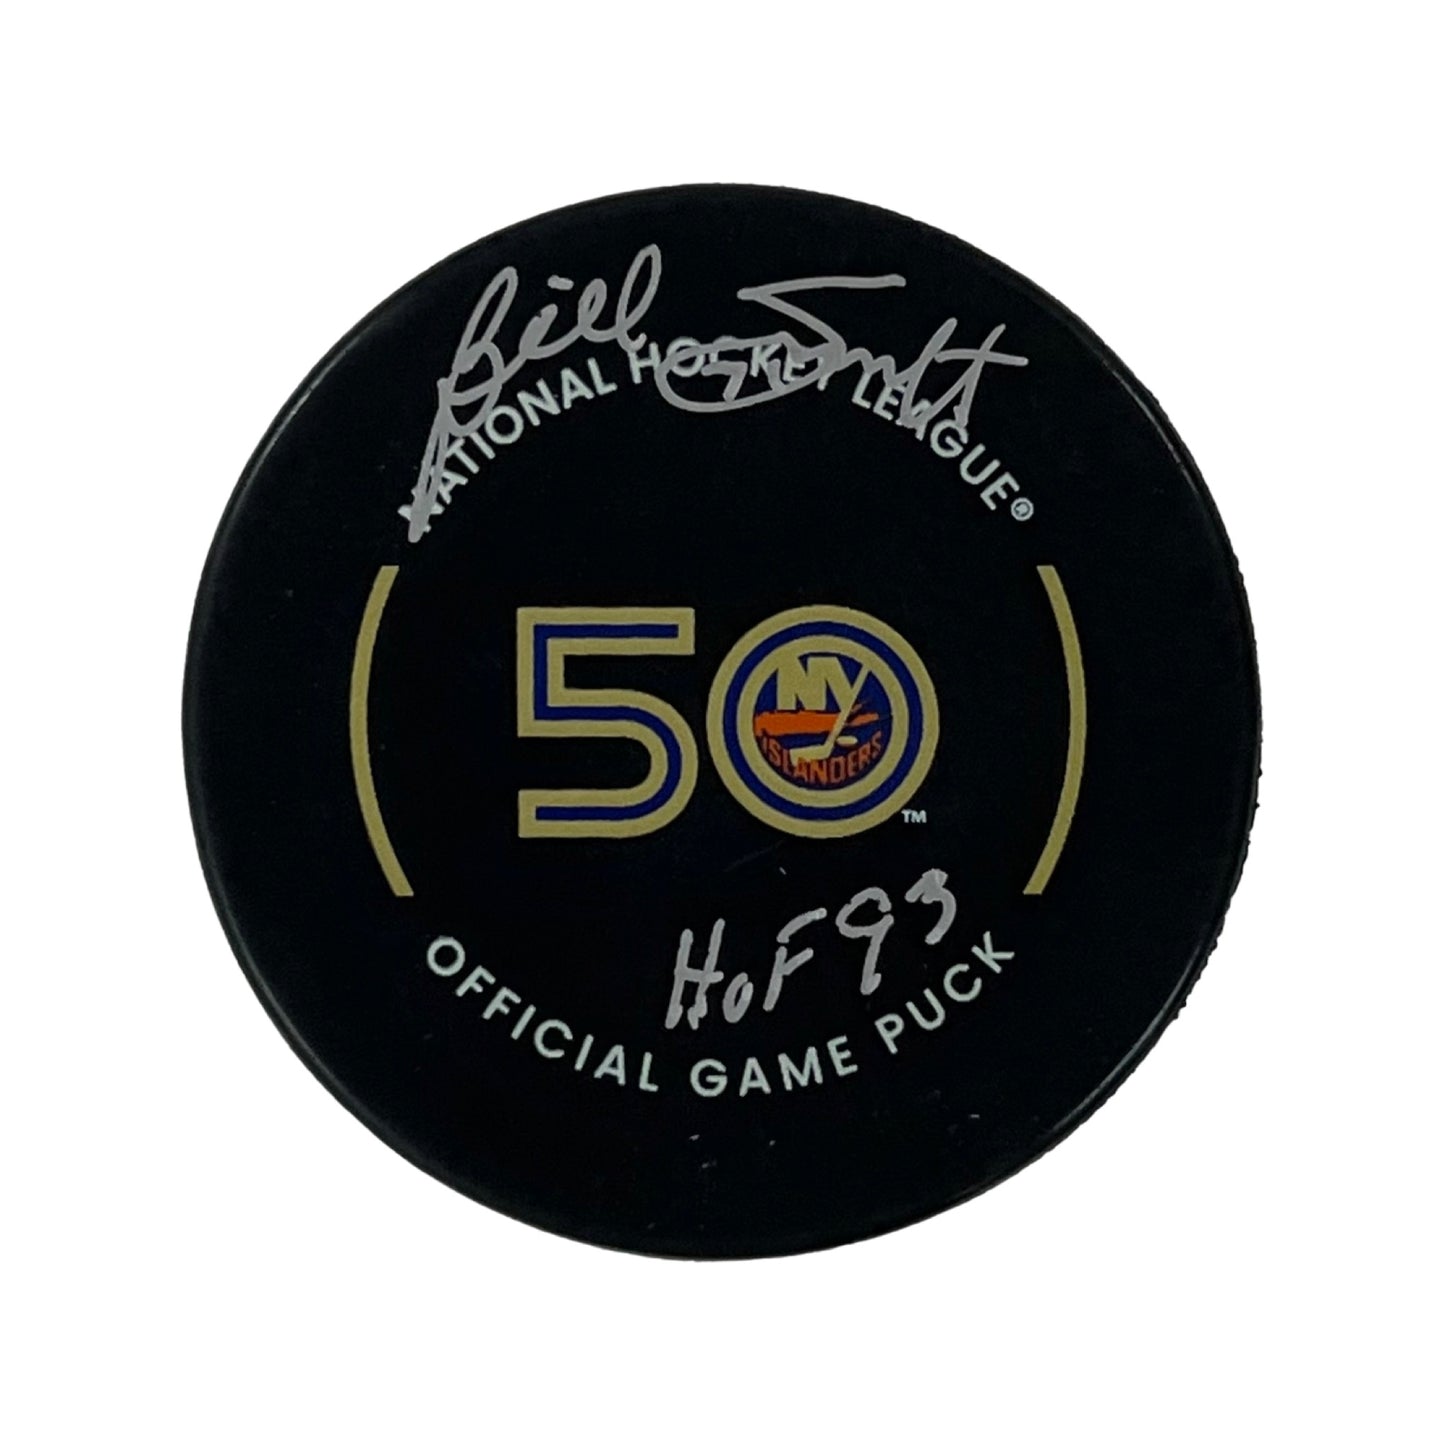 Billy Smith Autographed New York Islanders Official Game Puck “HOF 93” Inscription Steiner CX